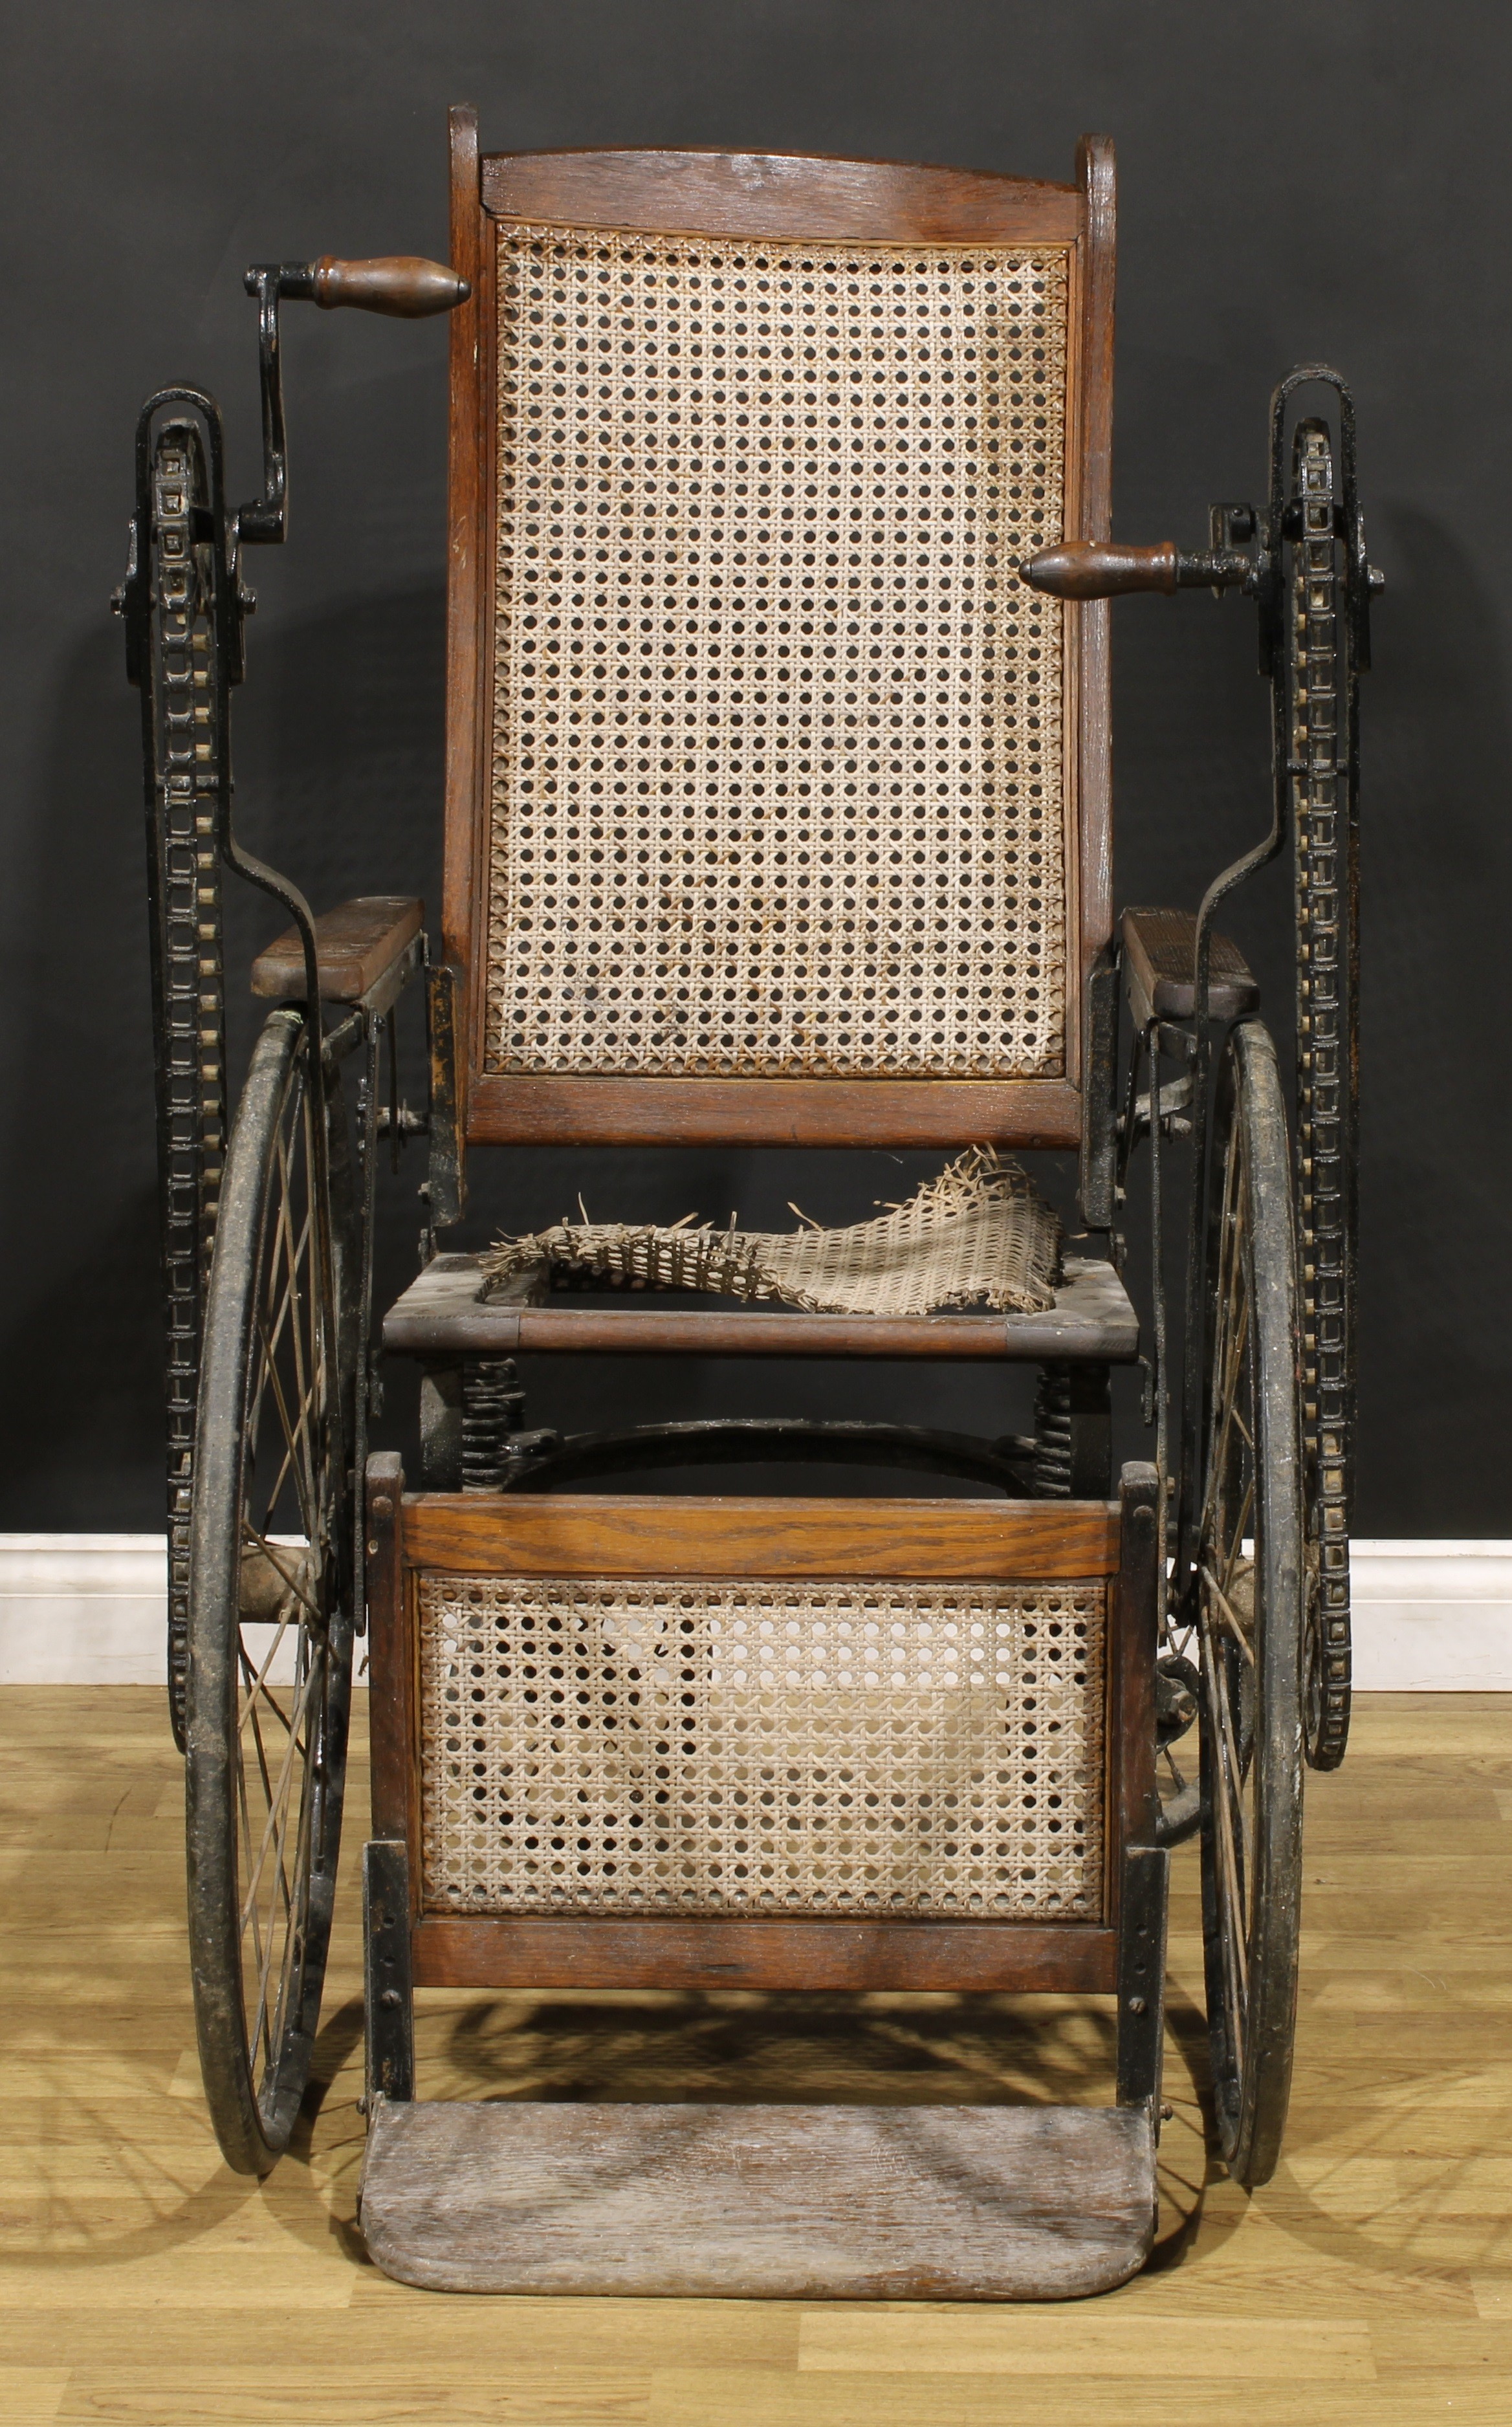 An early to mid-20th century American oak hand-crank wheelchair, by Gendron Wheel Company, - Image 3 of 5